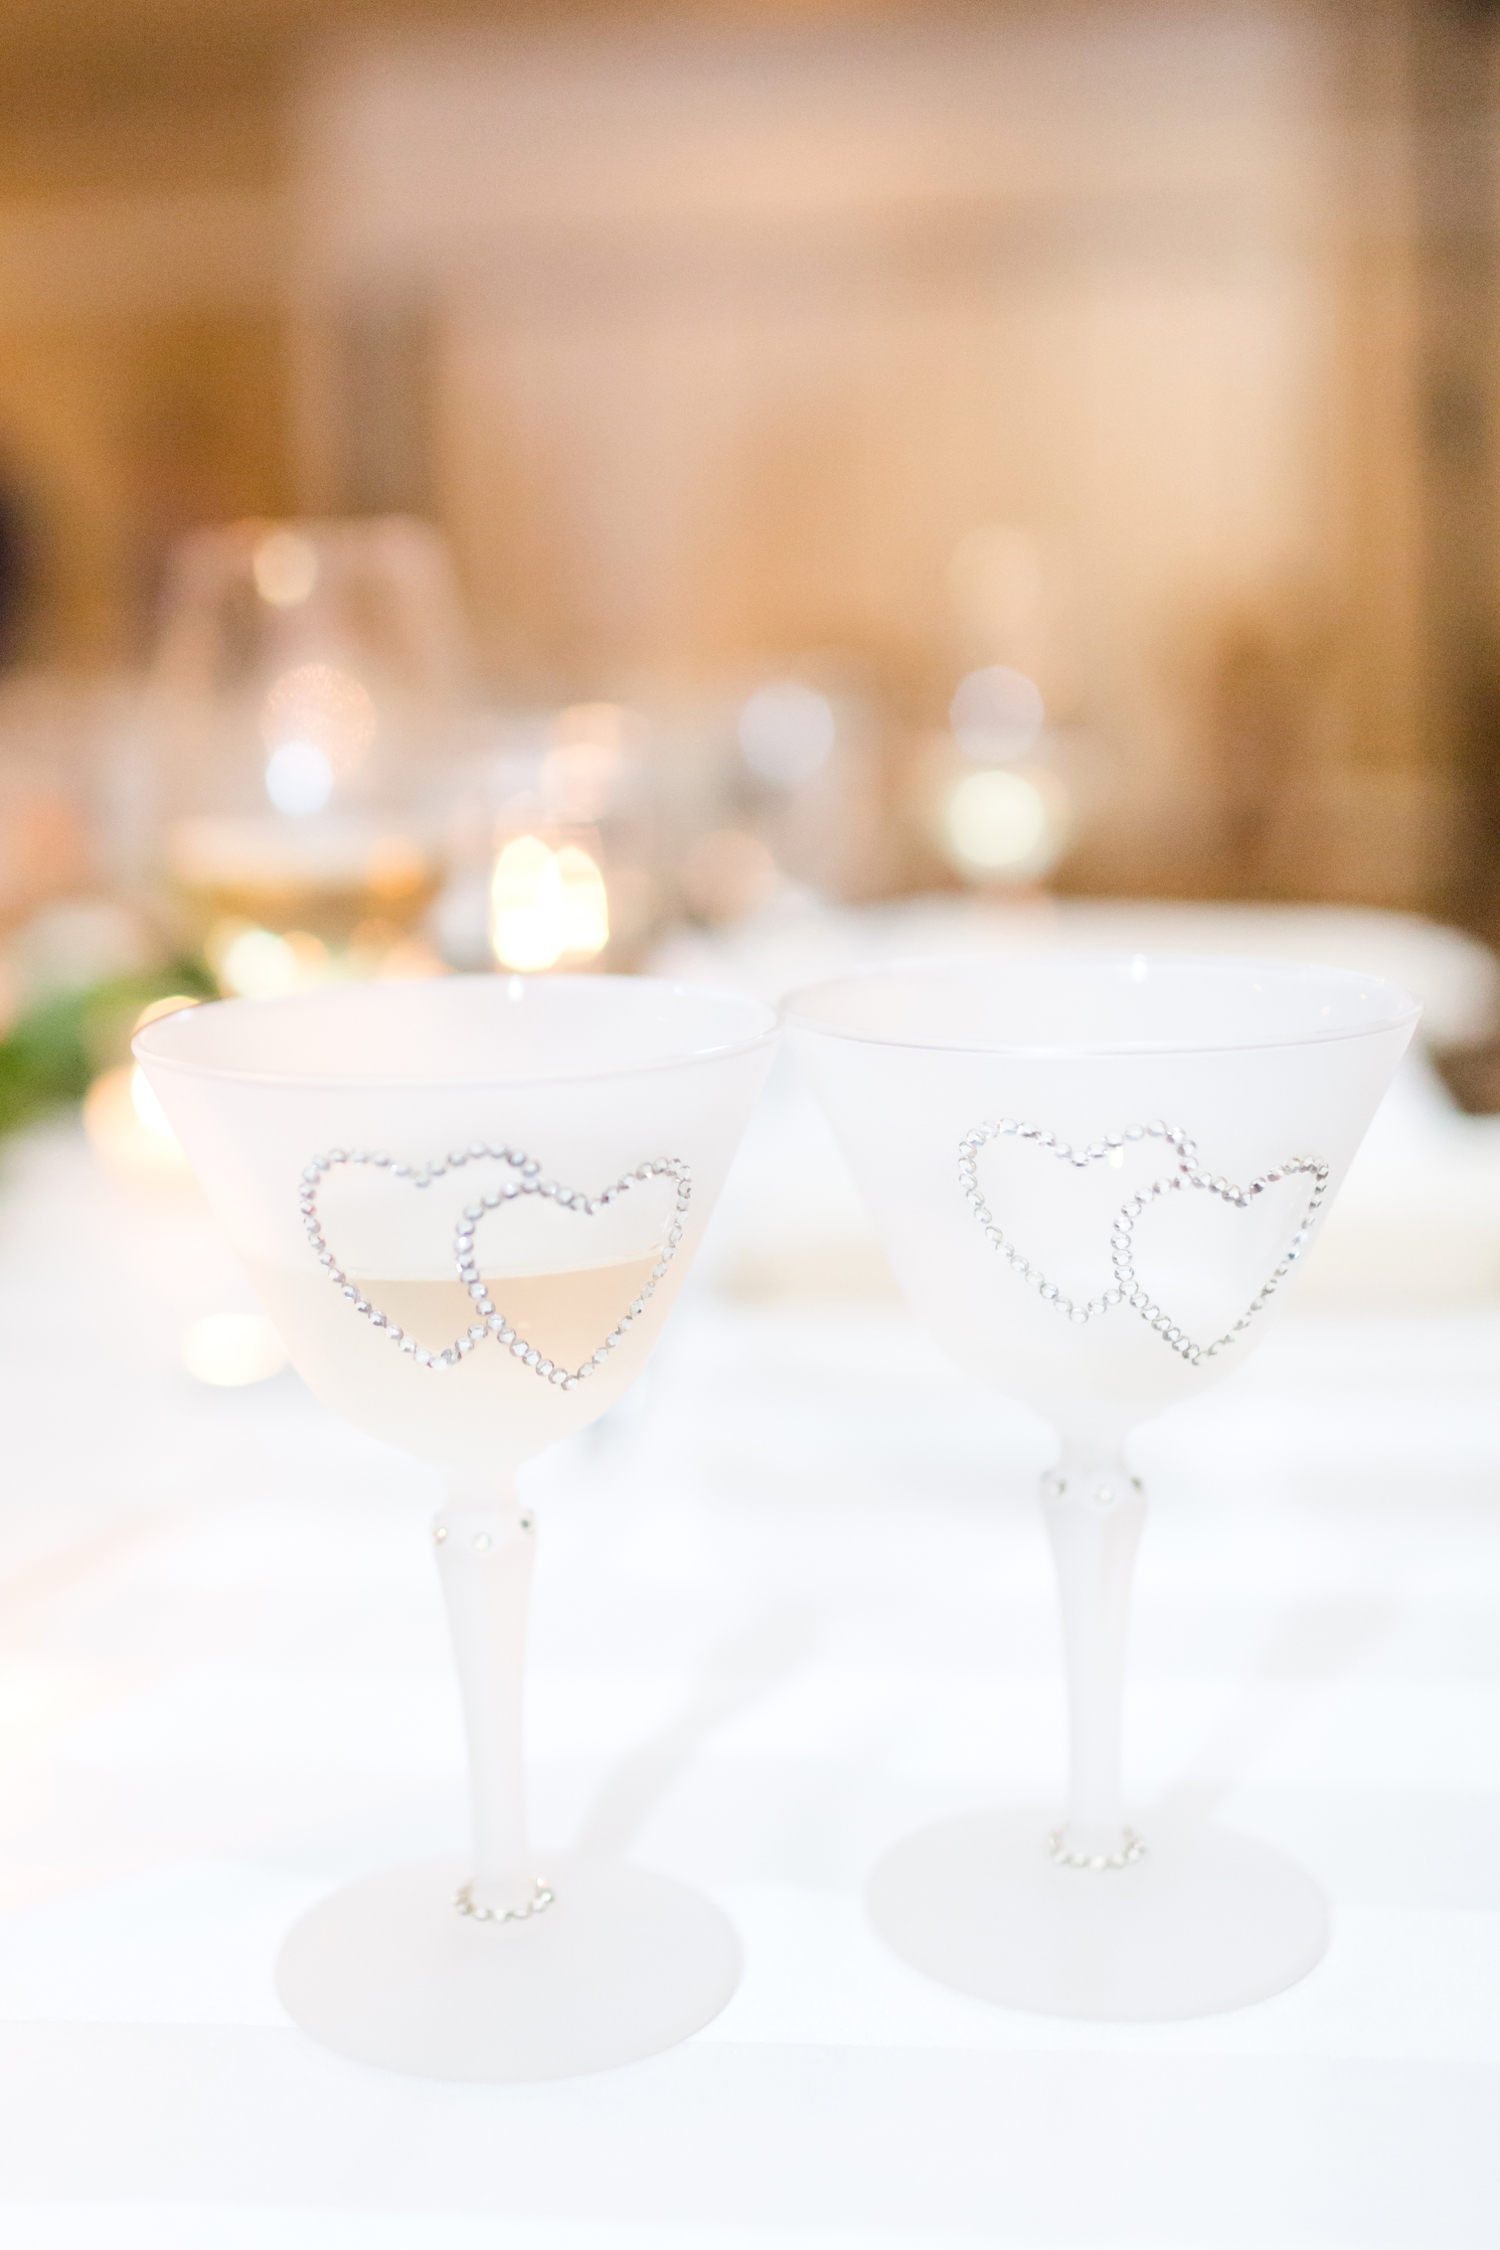  Special champagne glasses that have been at other family members weddings. So sweet! 